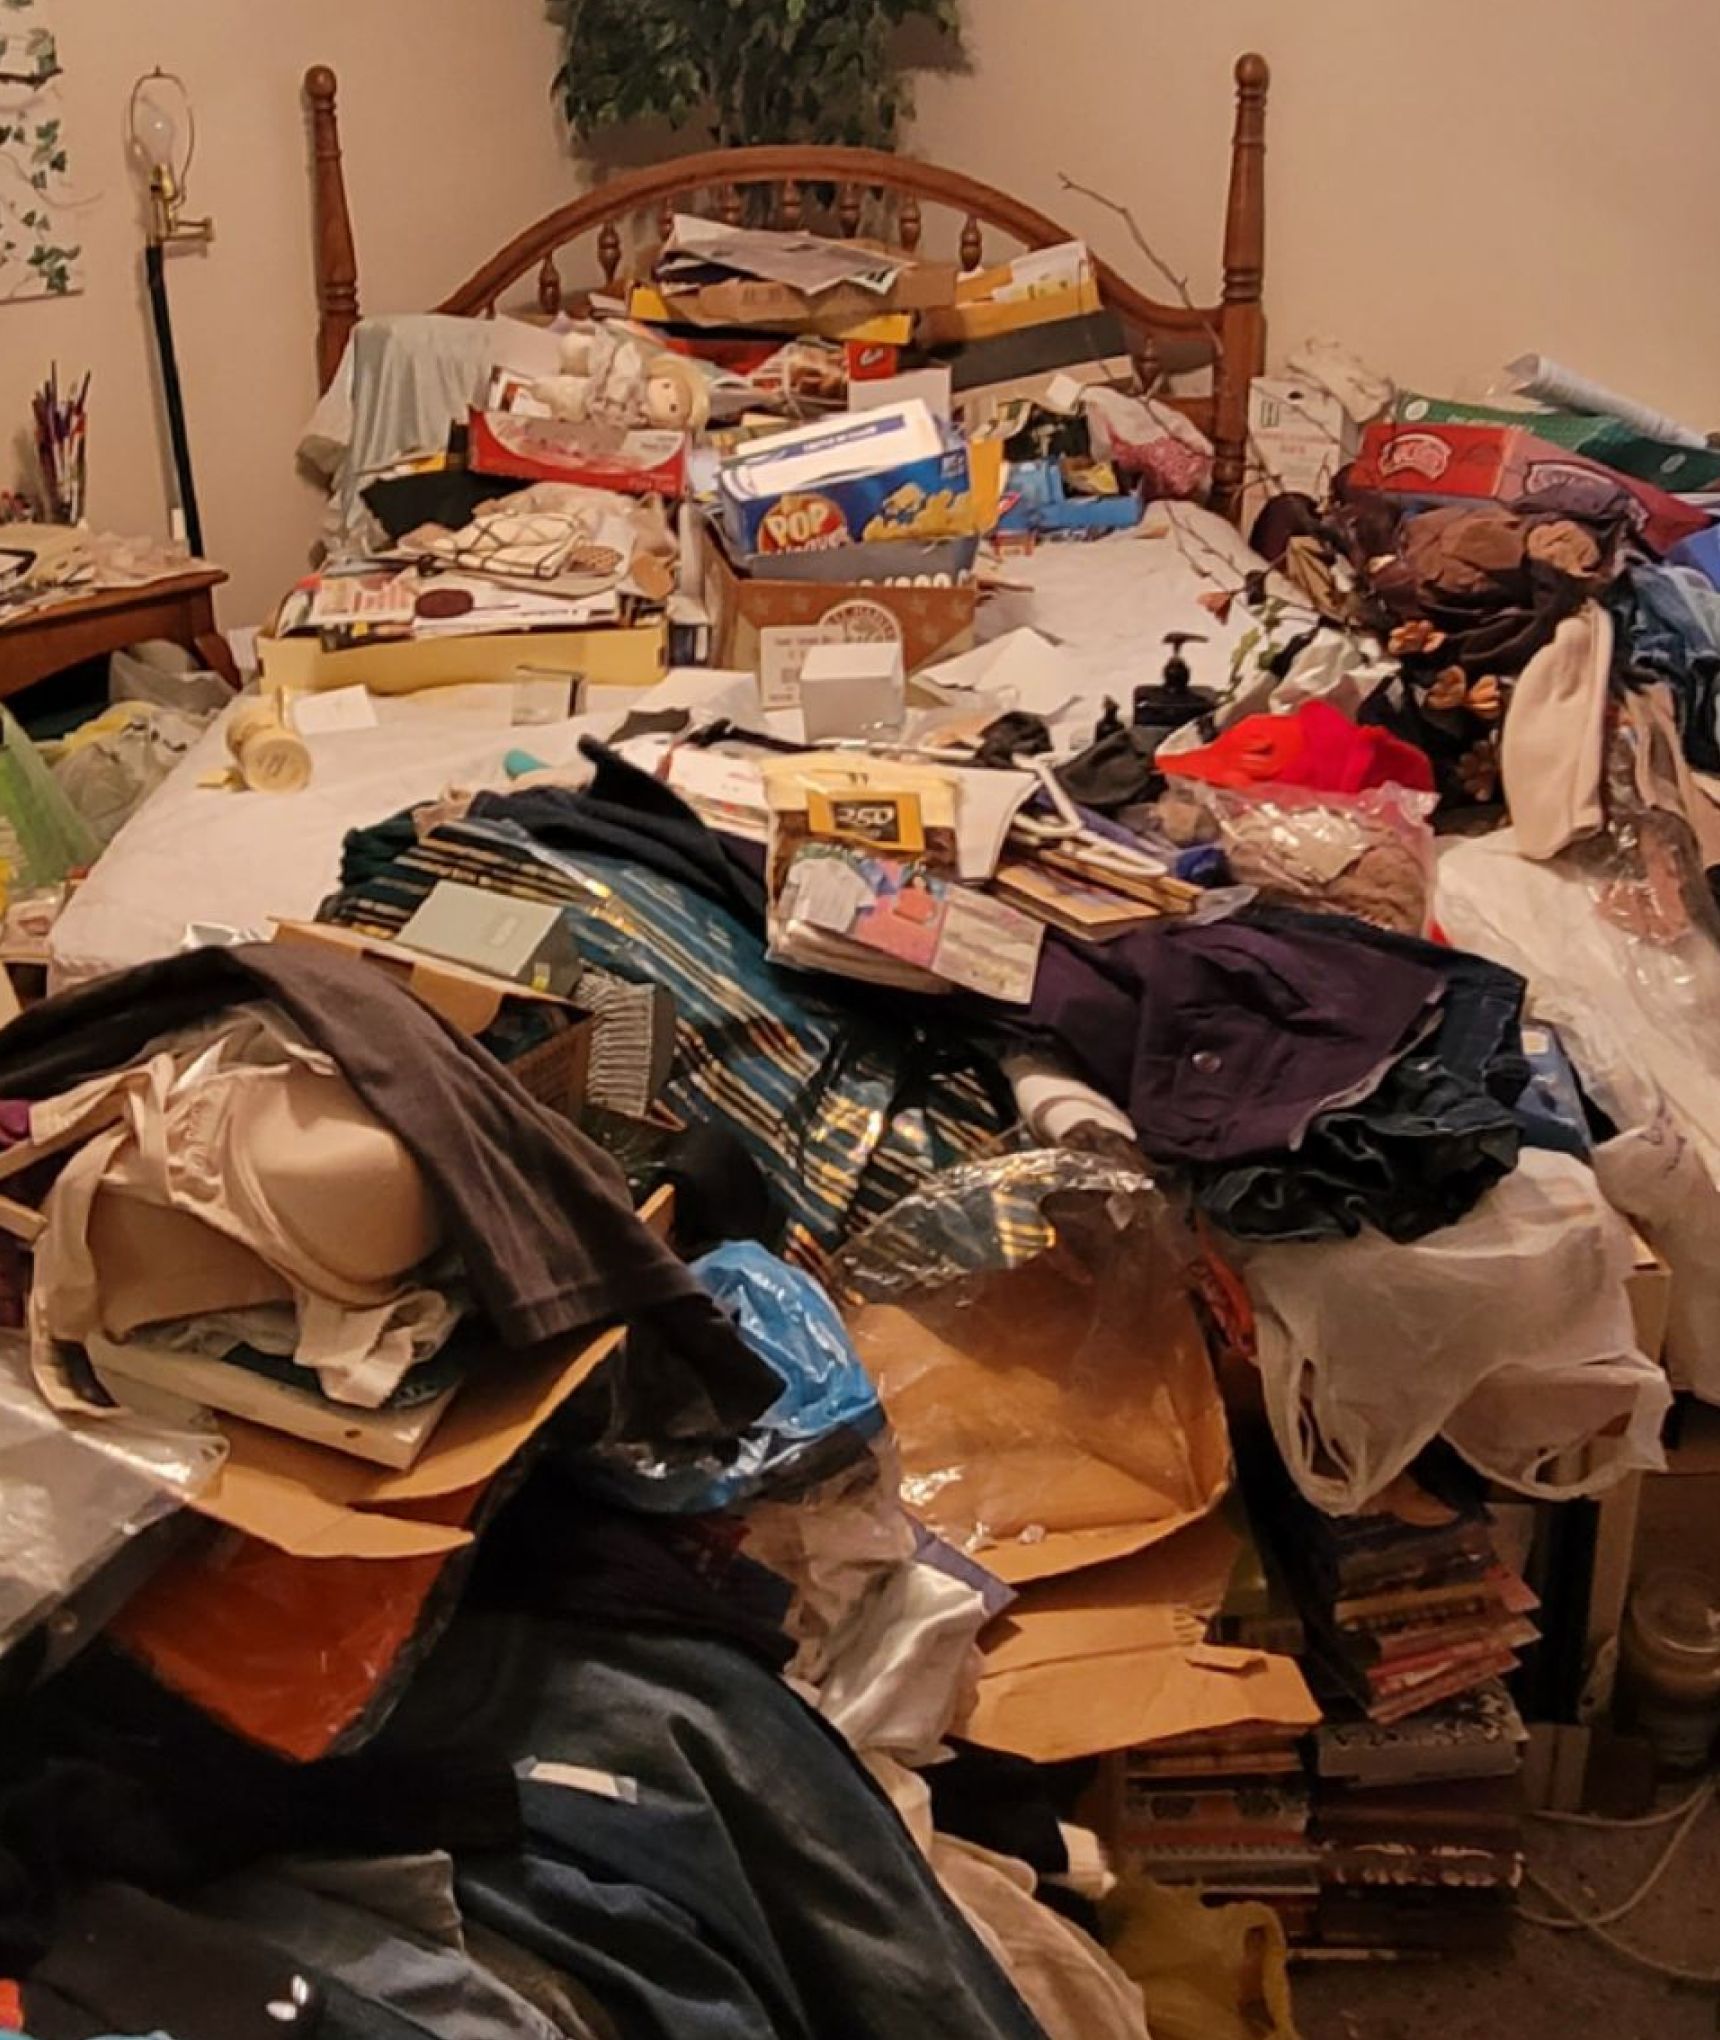 Estate, hoarder, apartment cleanouts